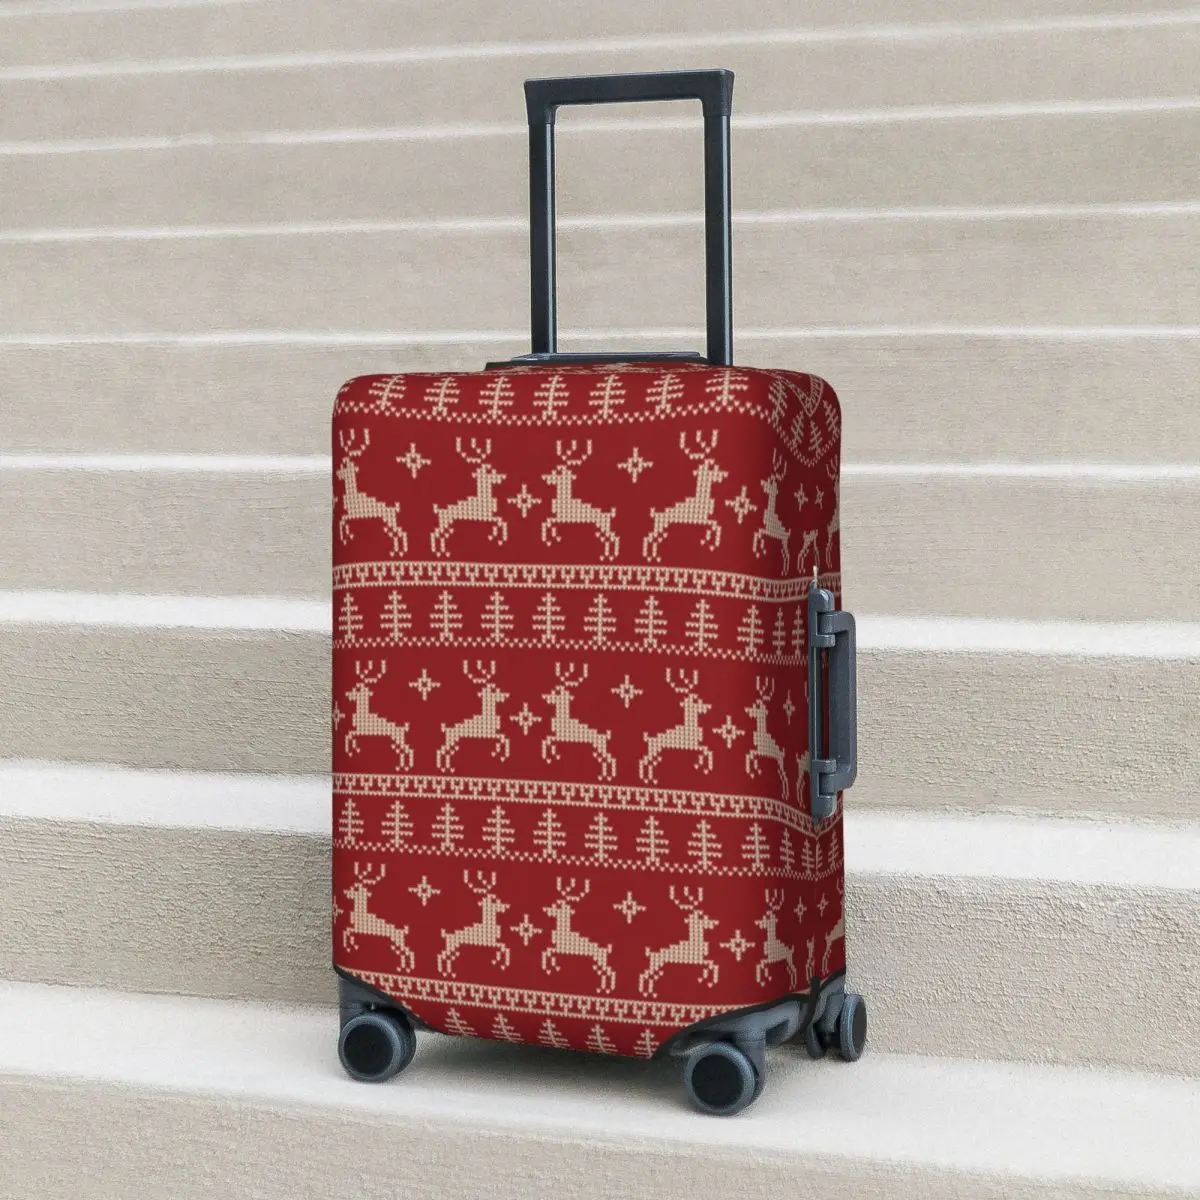 

Christmas Nordic Animal Suitcase Cover Fair Isle Red Deer Cruise Trip Holiday Practical Luggage Supplies Protection